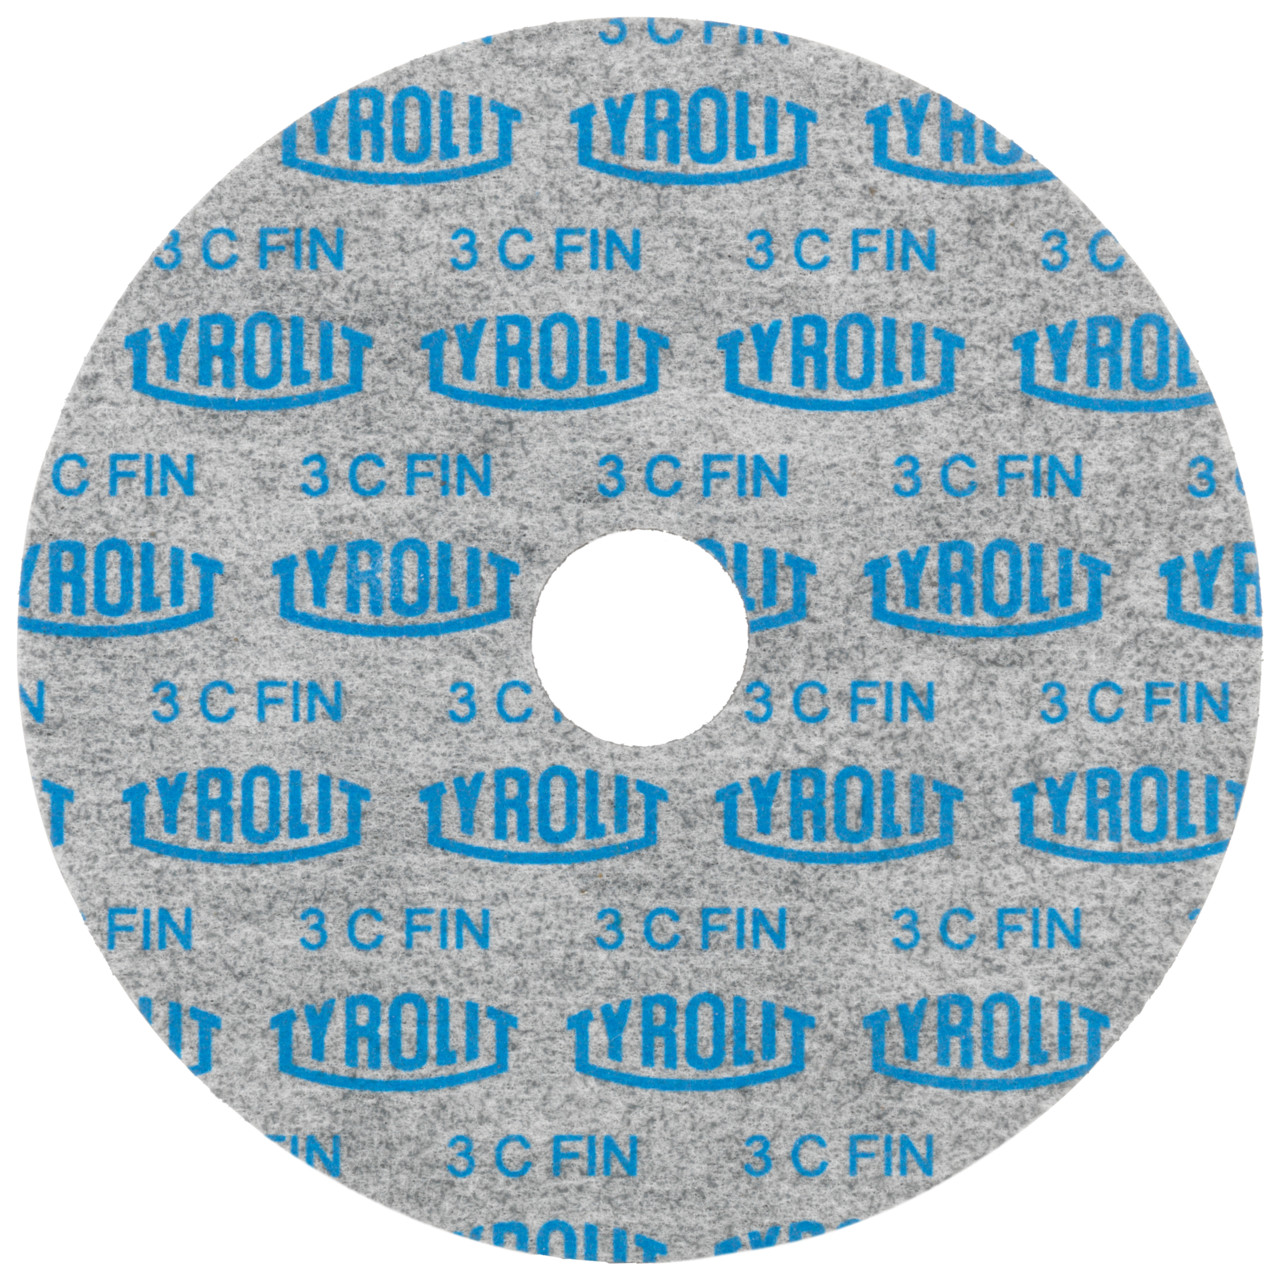 Tyrolit Pressed compact discs DxDxH 152x3x25.4 Universally applicable, 8 A GROB, shape: 1, Art. 34190231